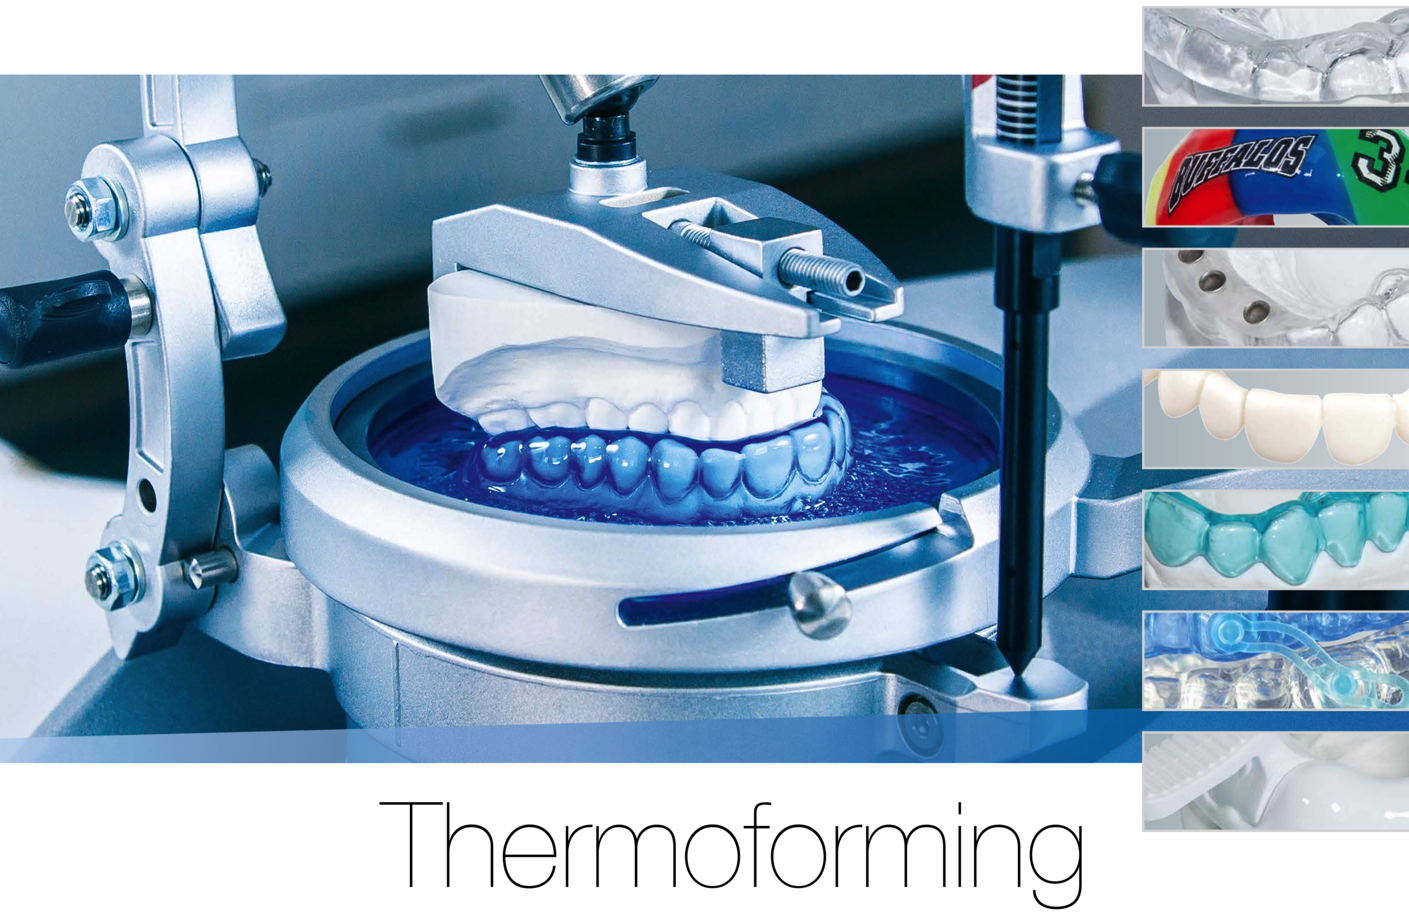 Erkodent Thermoforming